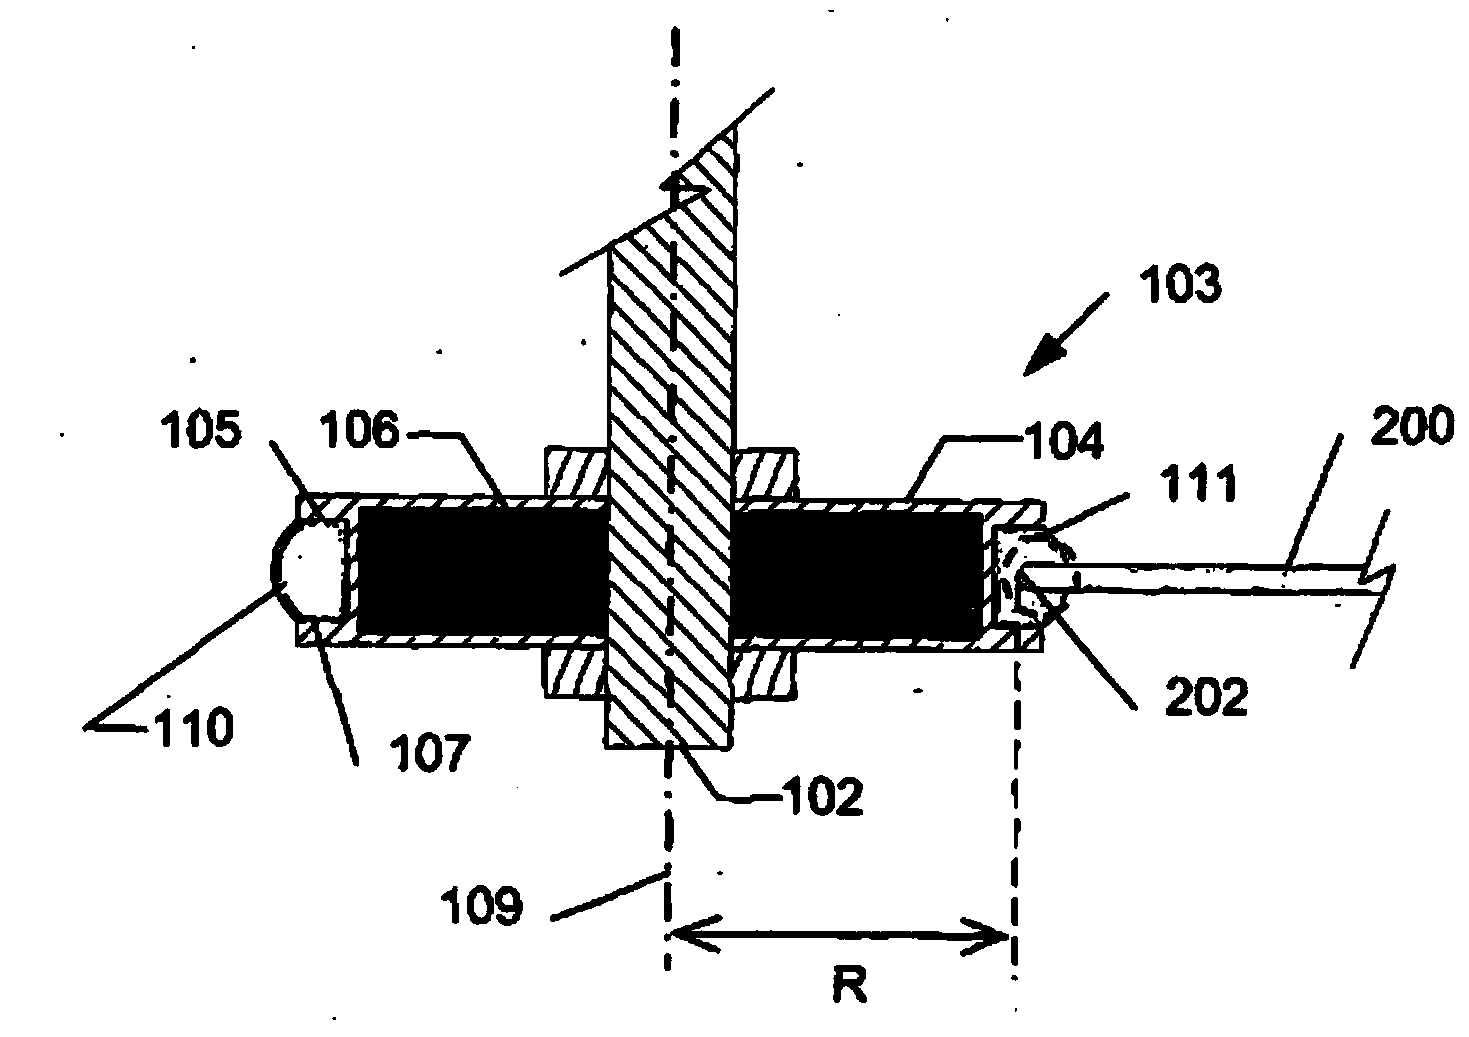 Apparatus and method for polishing an edge of an article using magnetorheological (MR) fluid